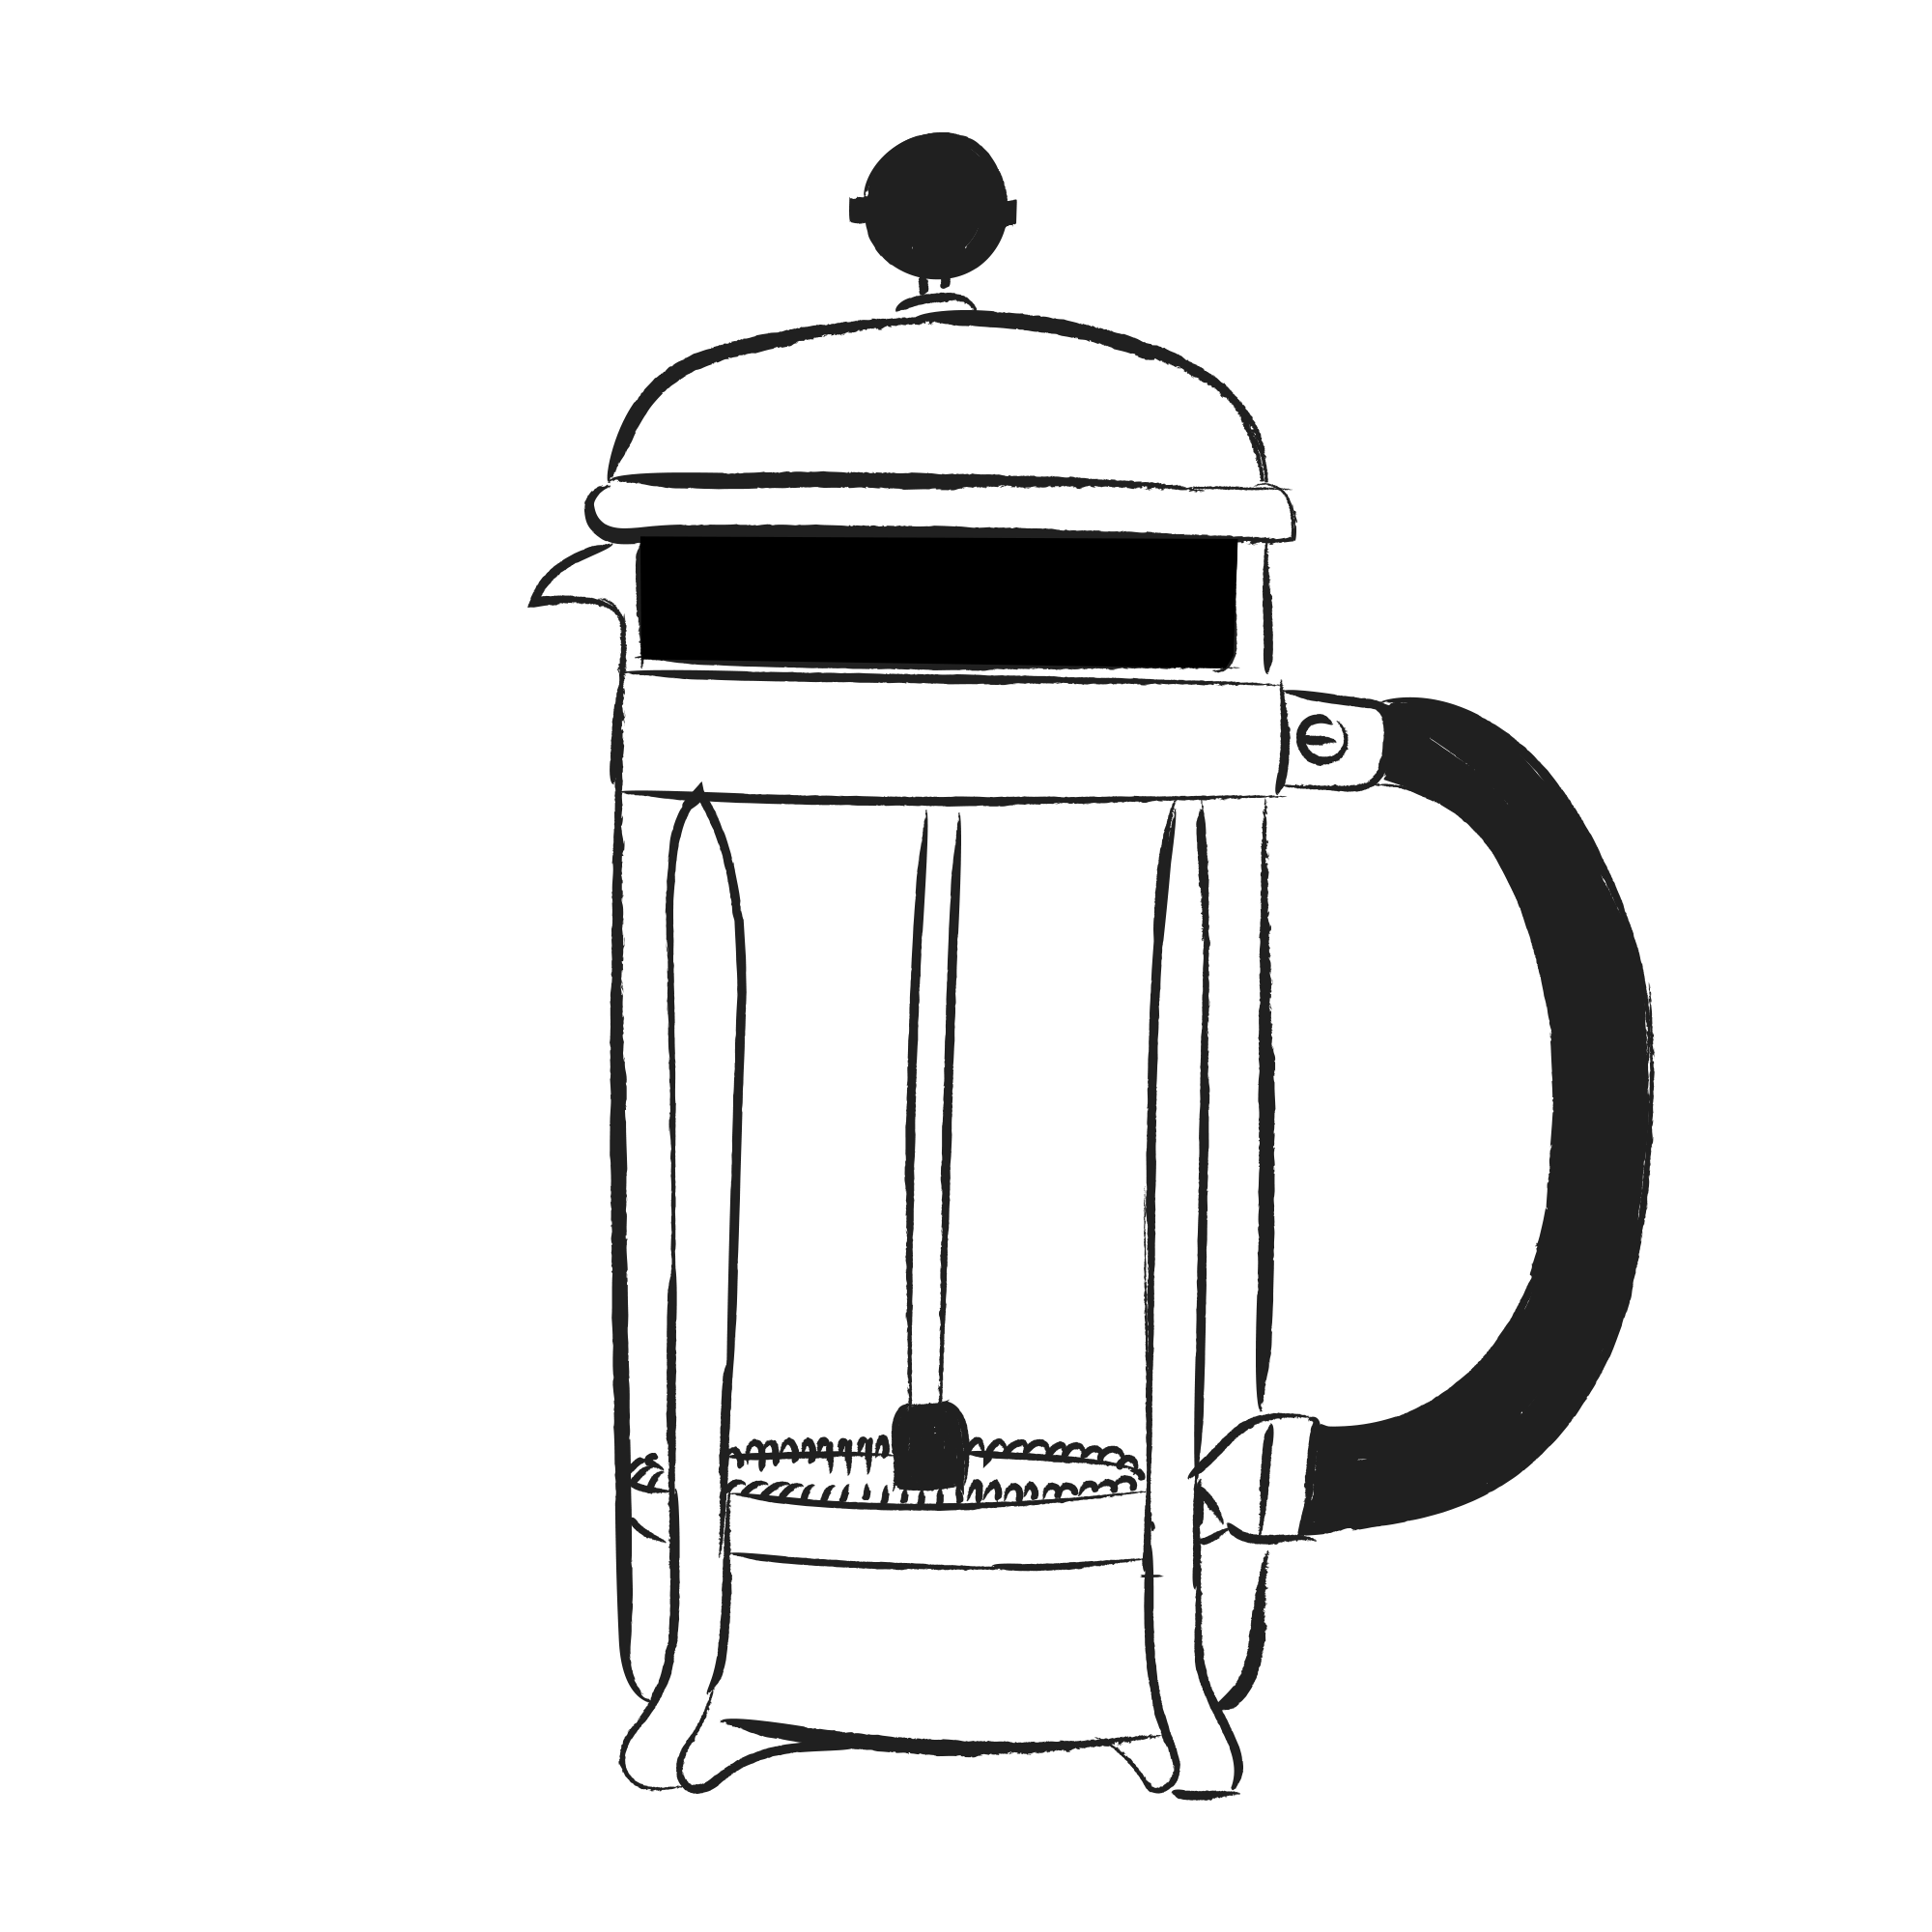 This image FrenchPress_BrewGuide is for visual improvements for page Zubereitungsarten